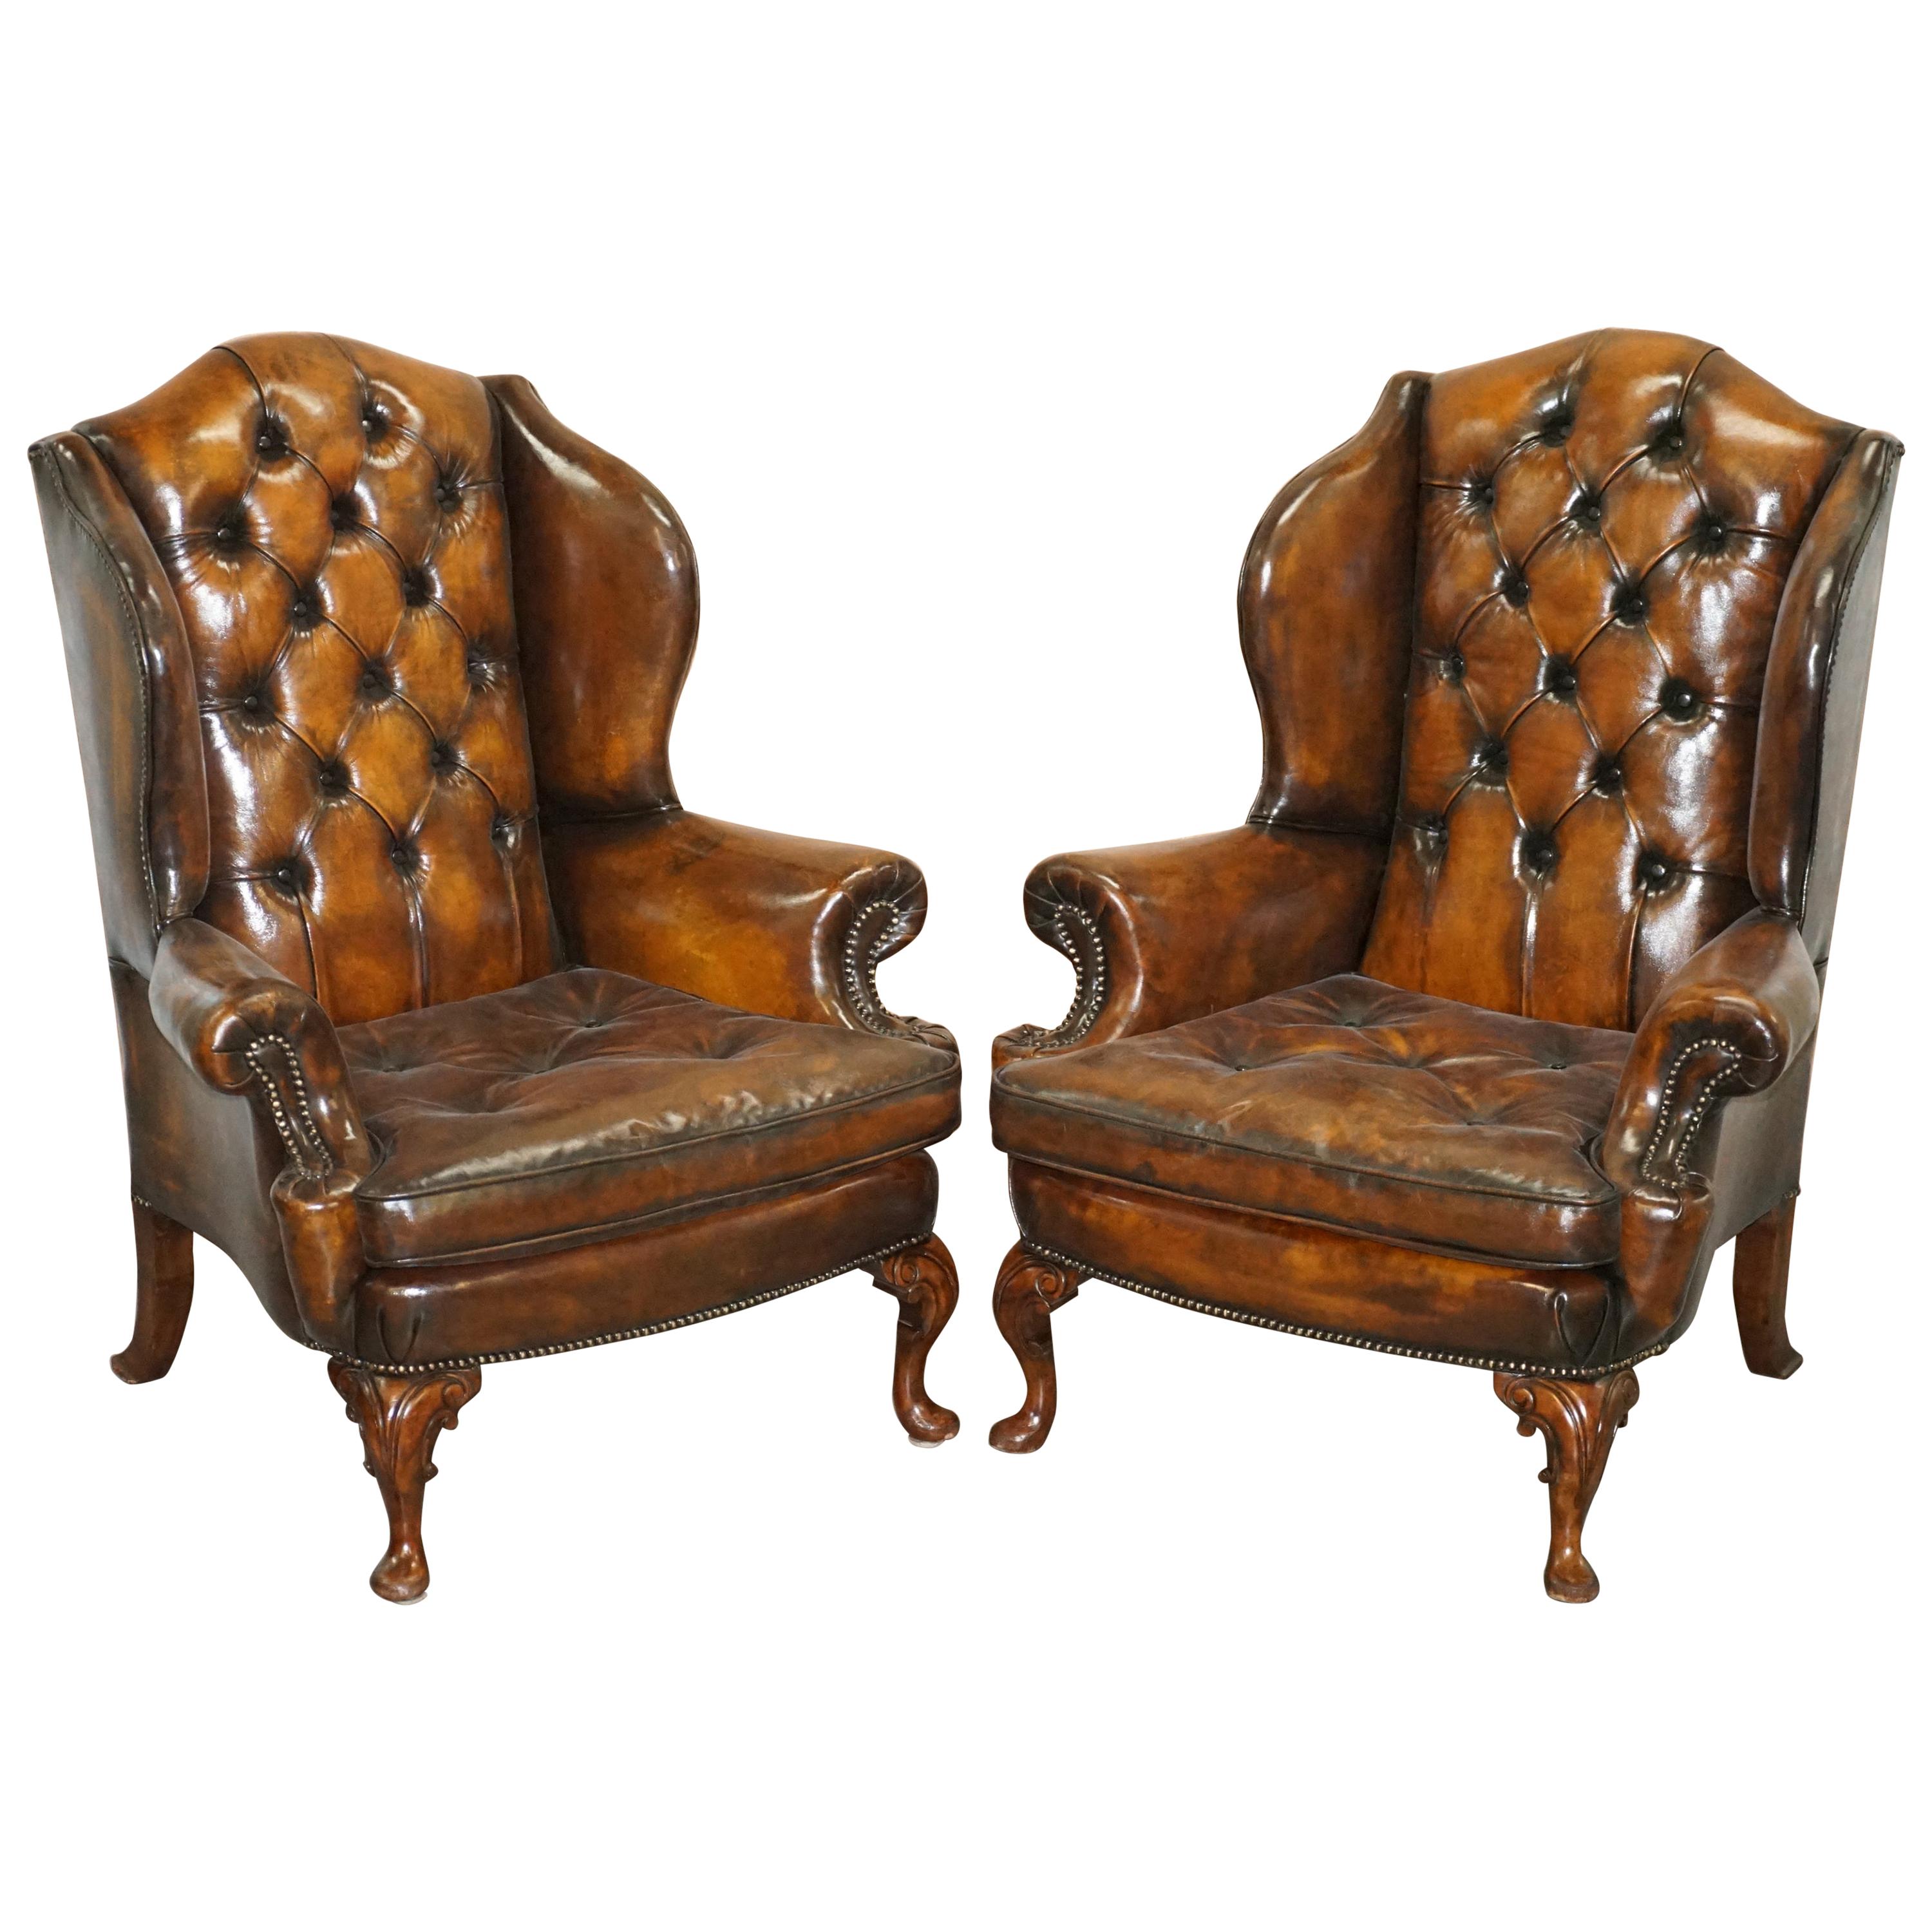 Pair of Georgian Irish Chesterfield Brown Leather Wingback Armchairs Carved Legs